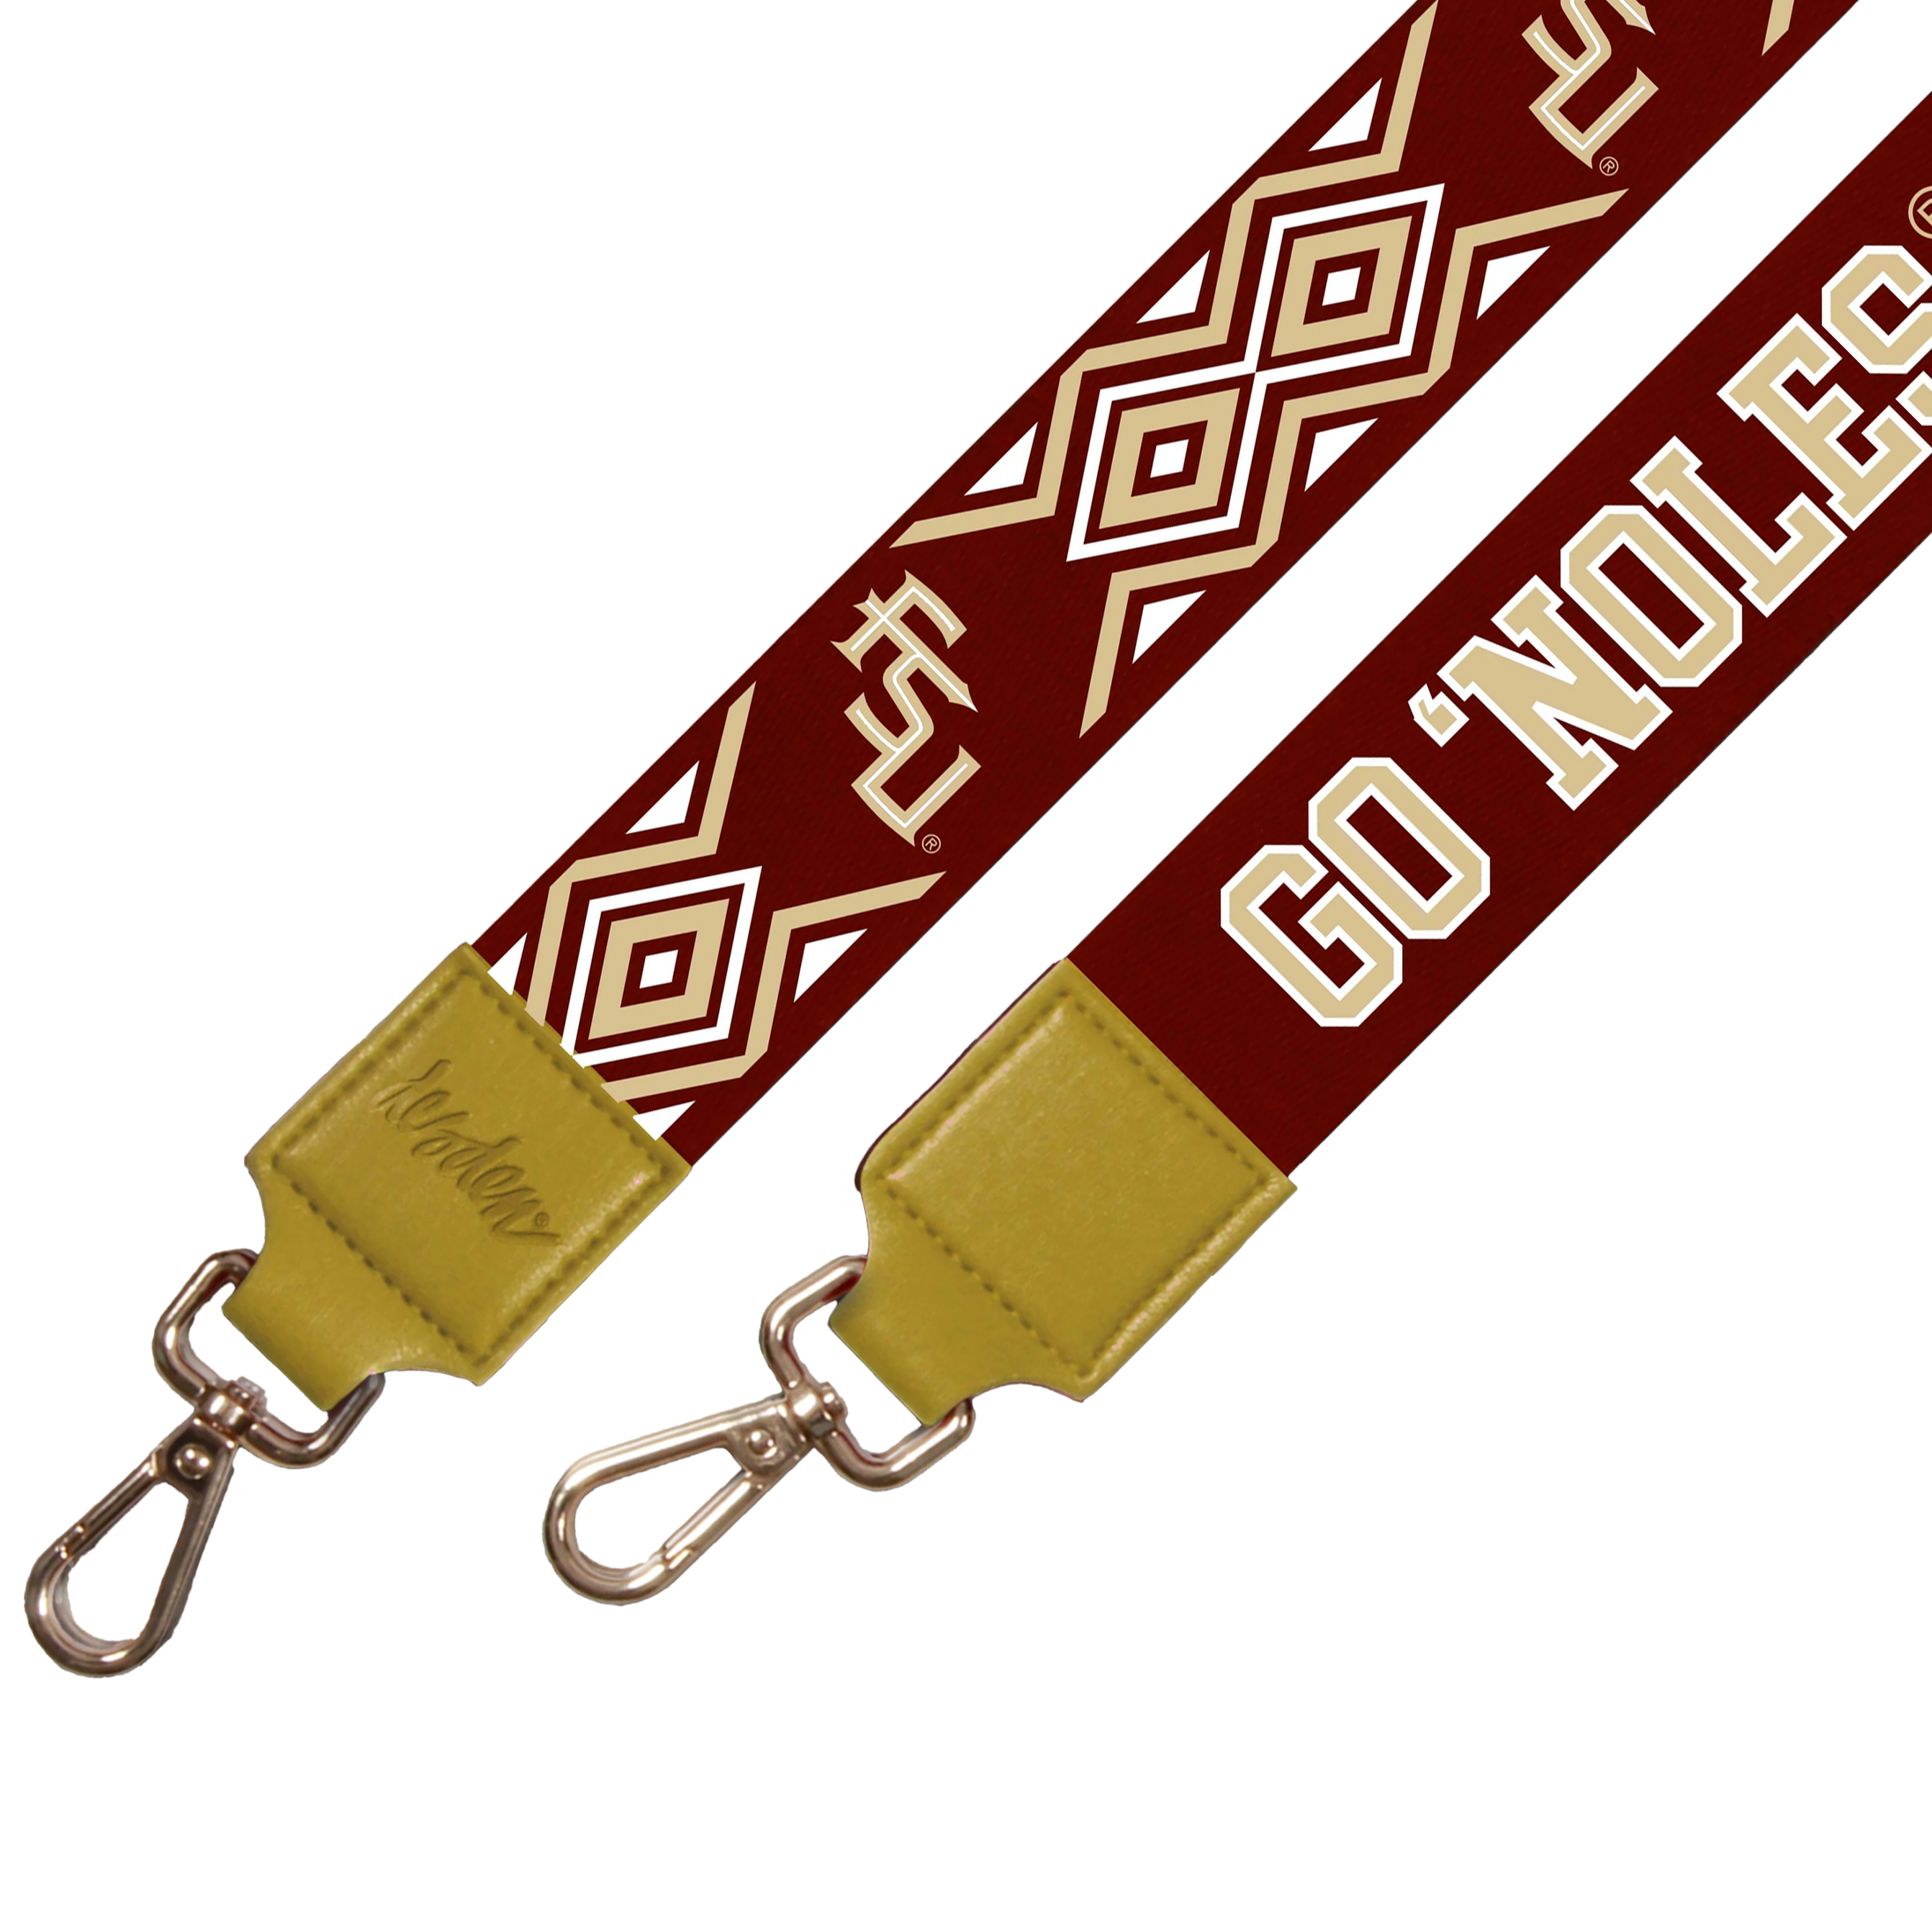 FLORIDA STATE 2" - Officially Licensed - Ikat Design